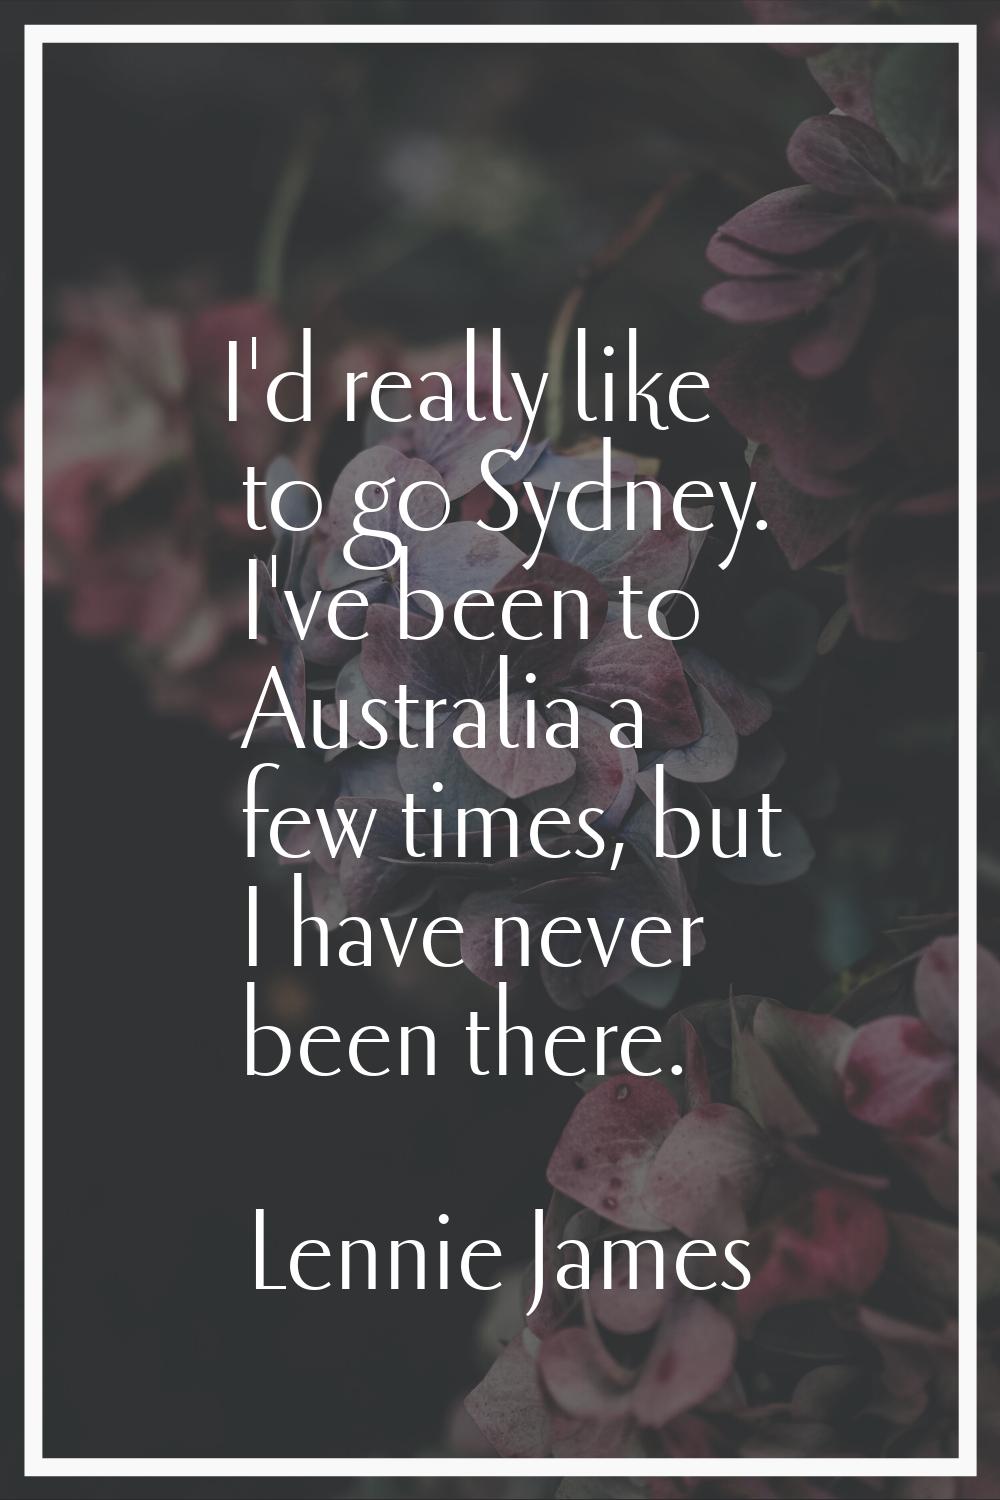 I'd really like to go Sydney. I've been to Australia a few times, but I have never been there.